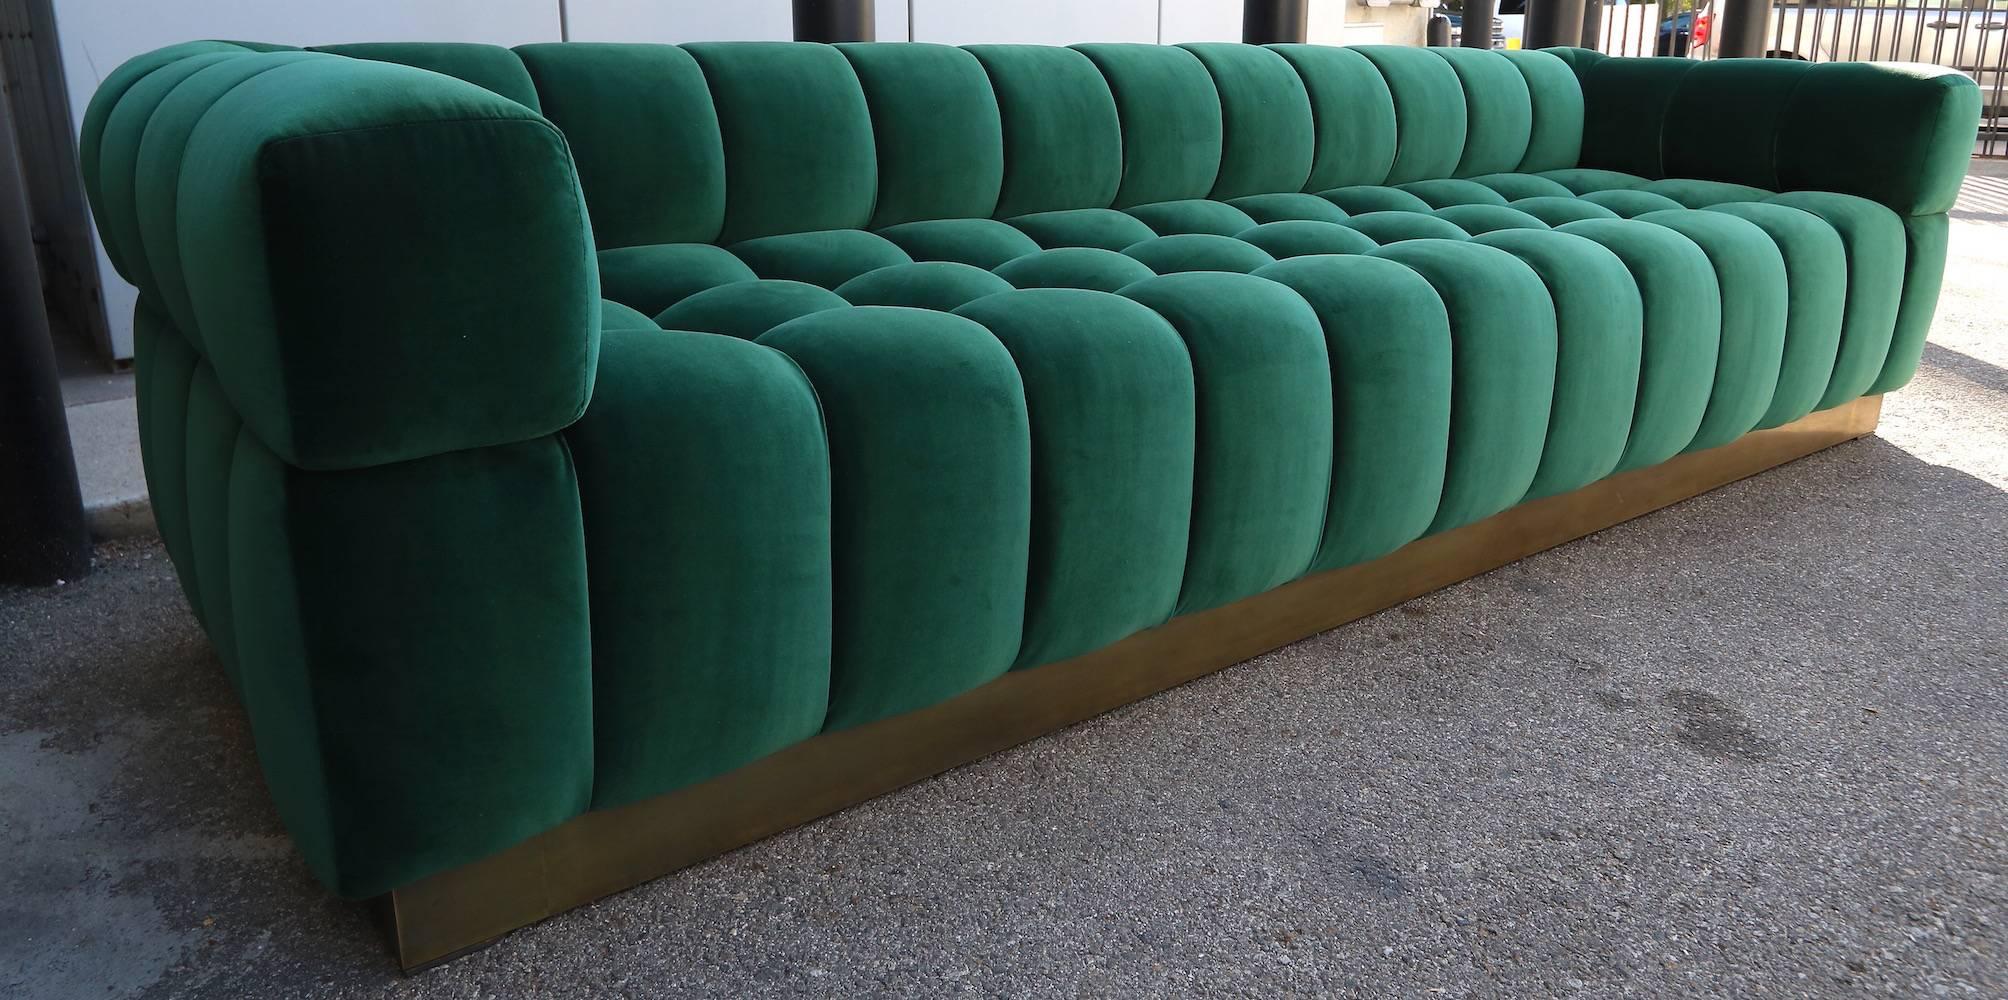 Custom tufted sofa with brass base, in dark green Belgium velvet by Adesso Imports. Can be made in different colors and fabrics or a different metal for the base.